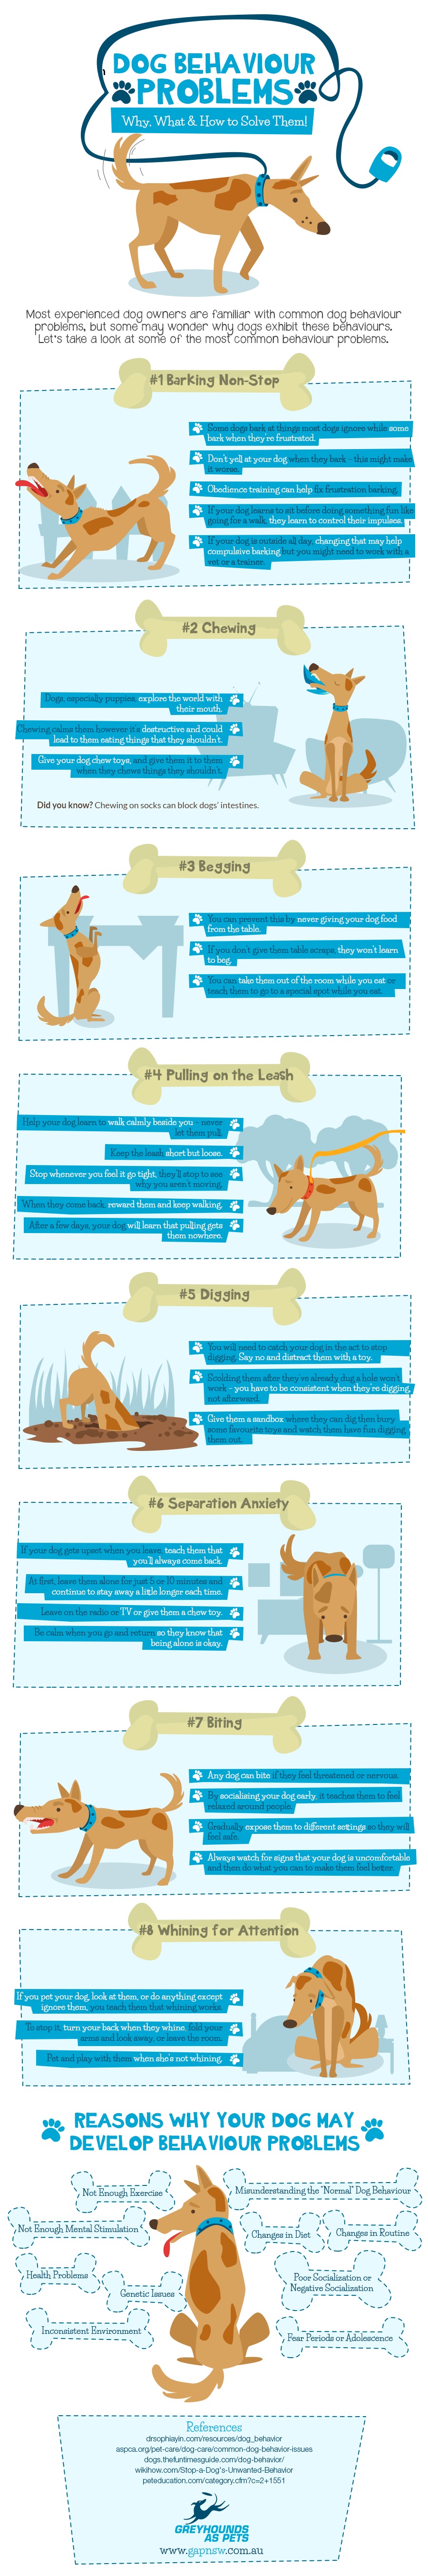 Dog Behaviour Problems: Why, What & How To Solve Them - Infographic